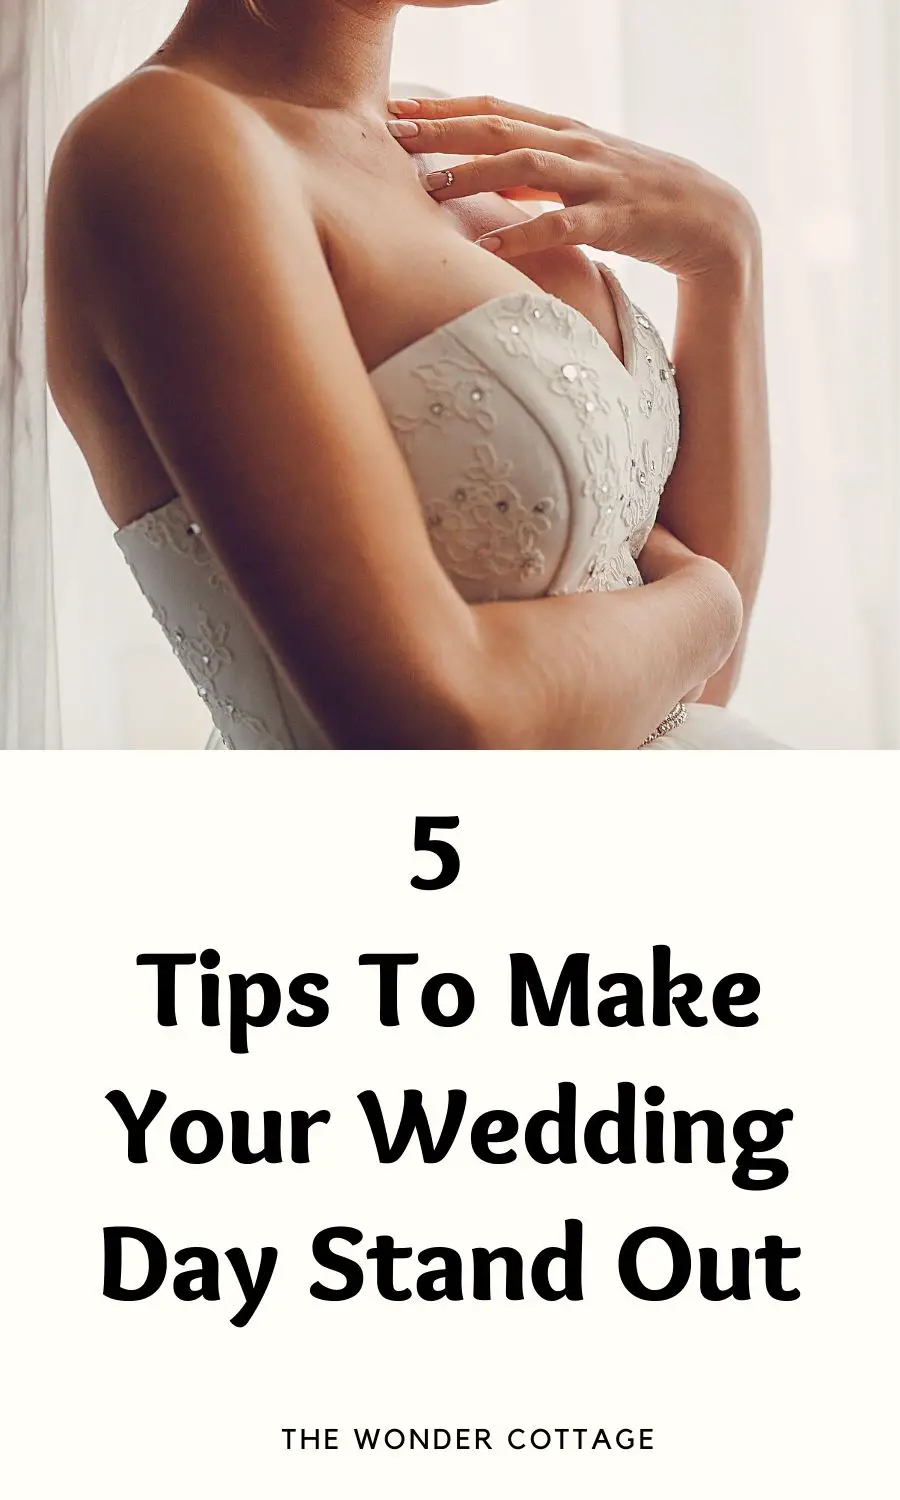 5 tips to make your wedding day stand out